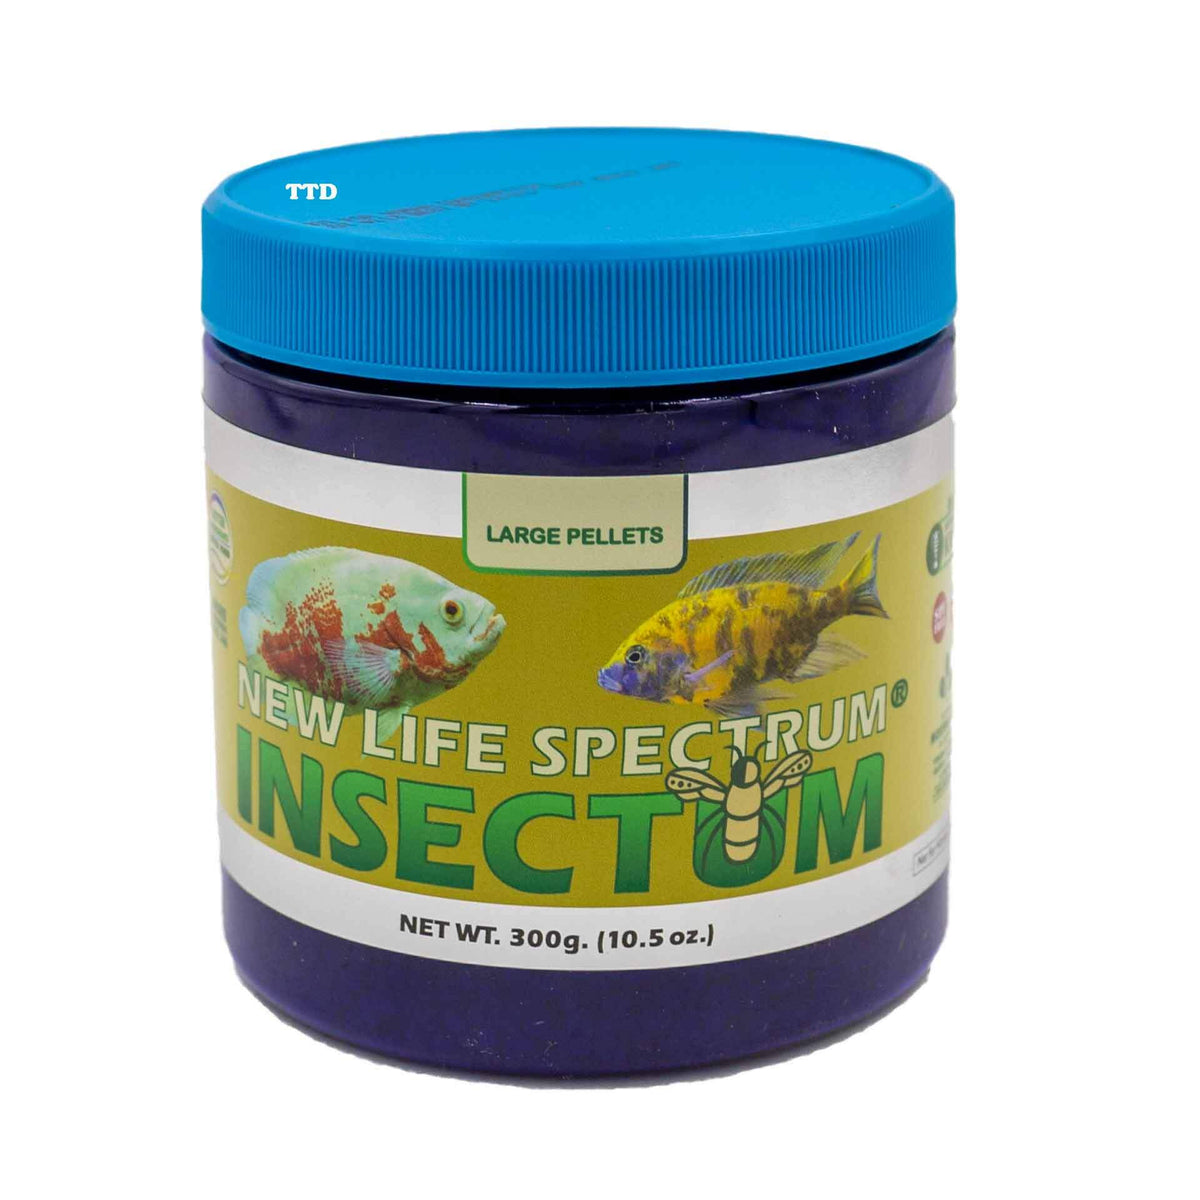 New Life Spectrum Insectum Large 300g - Sinking Pellet 3-3.5mm